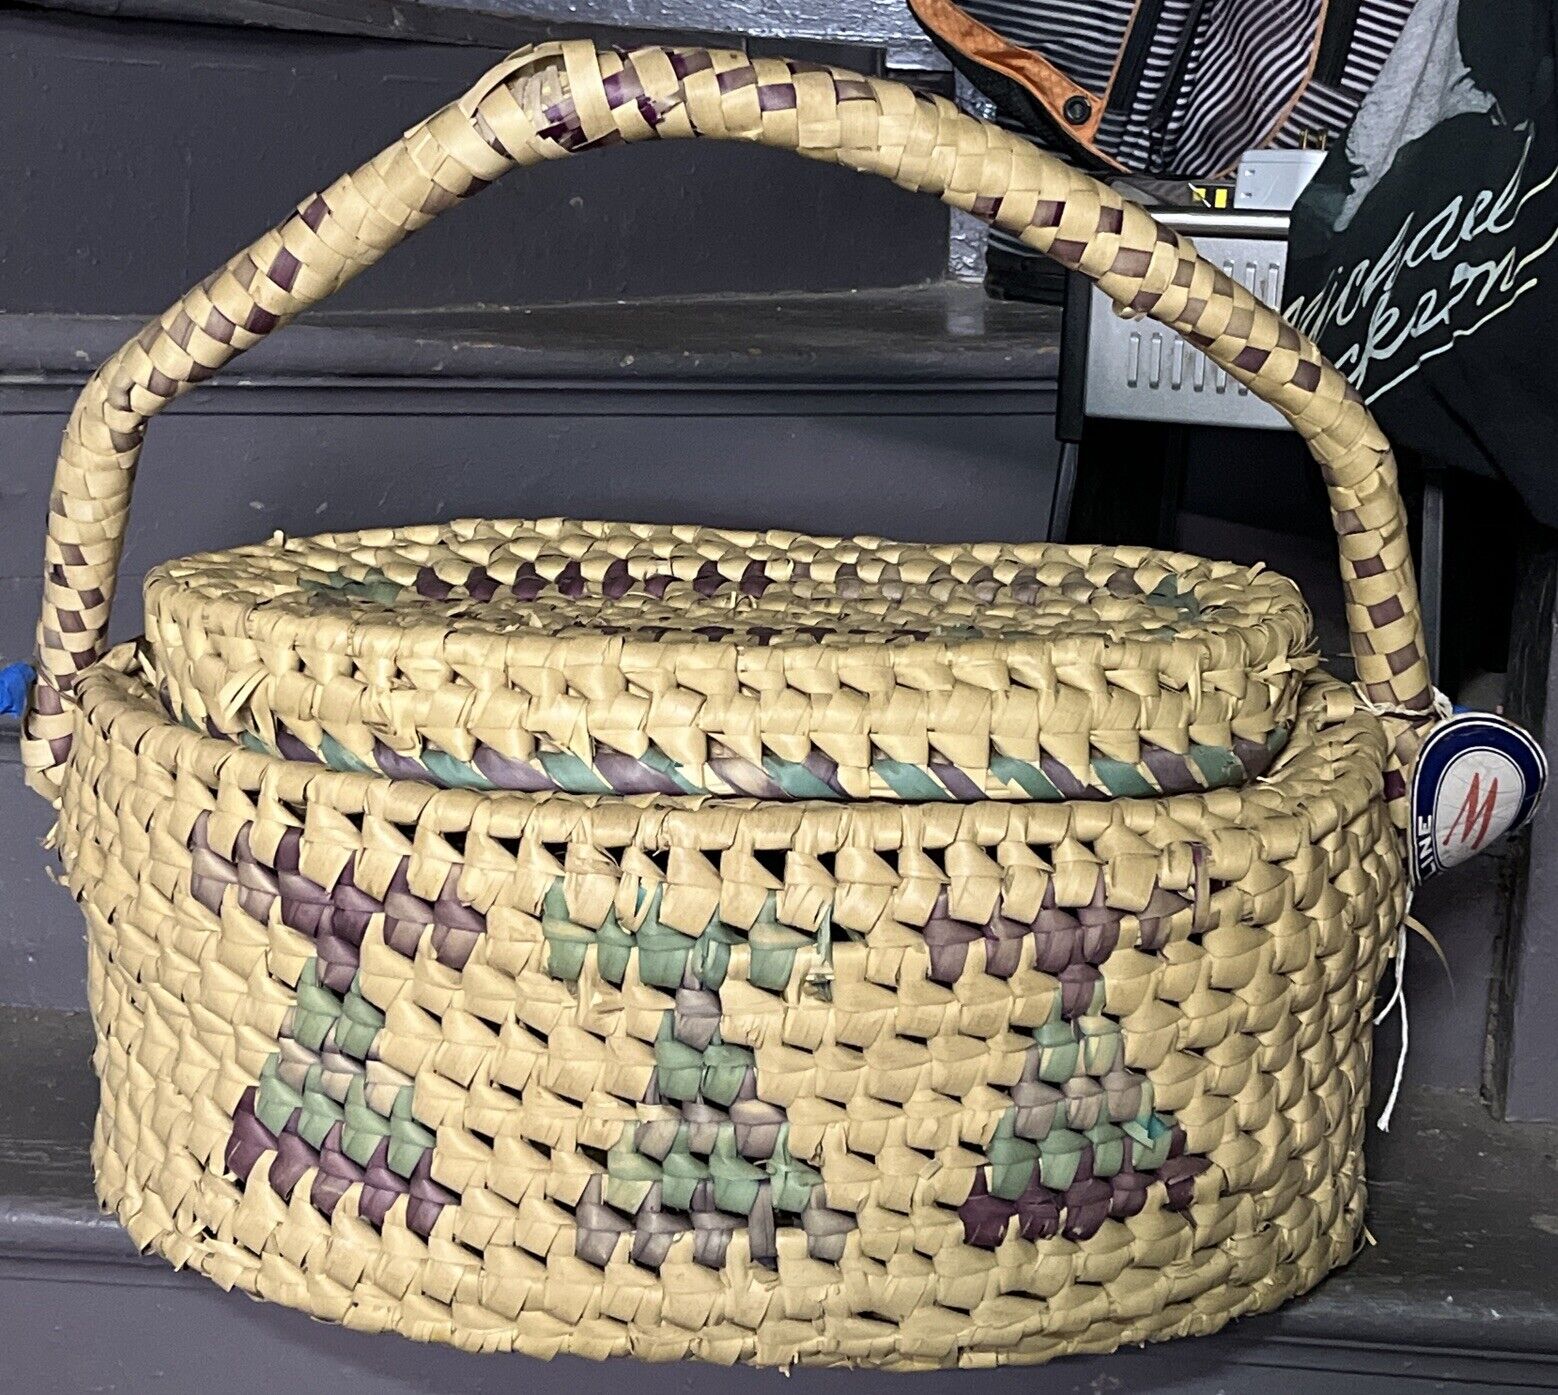 ANTIQUE Salish Native American Indian Travel Basket W/ Lid LARGE 25x13x15 Inch